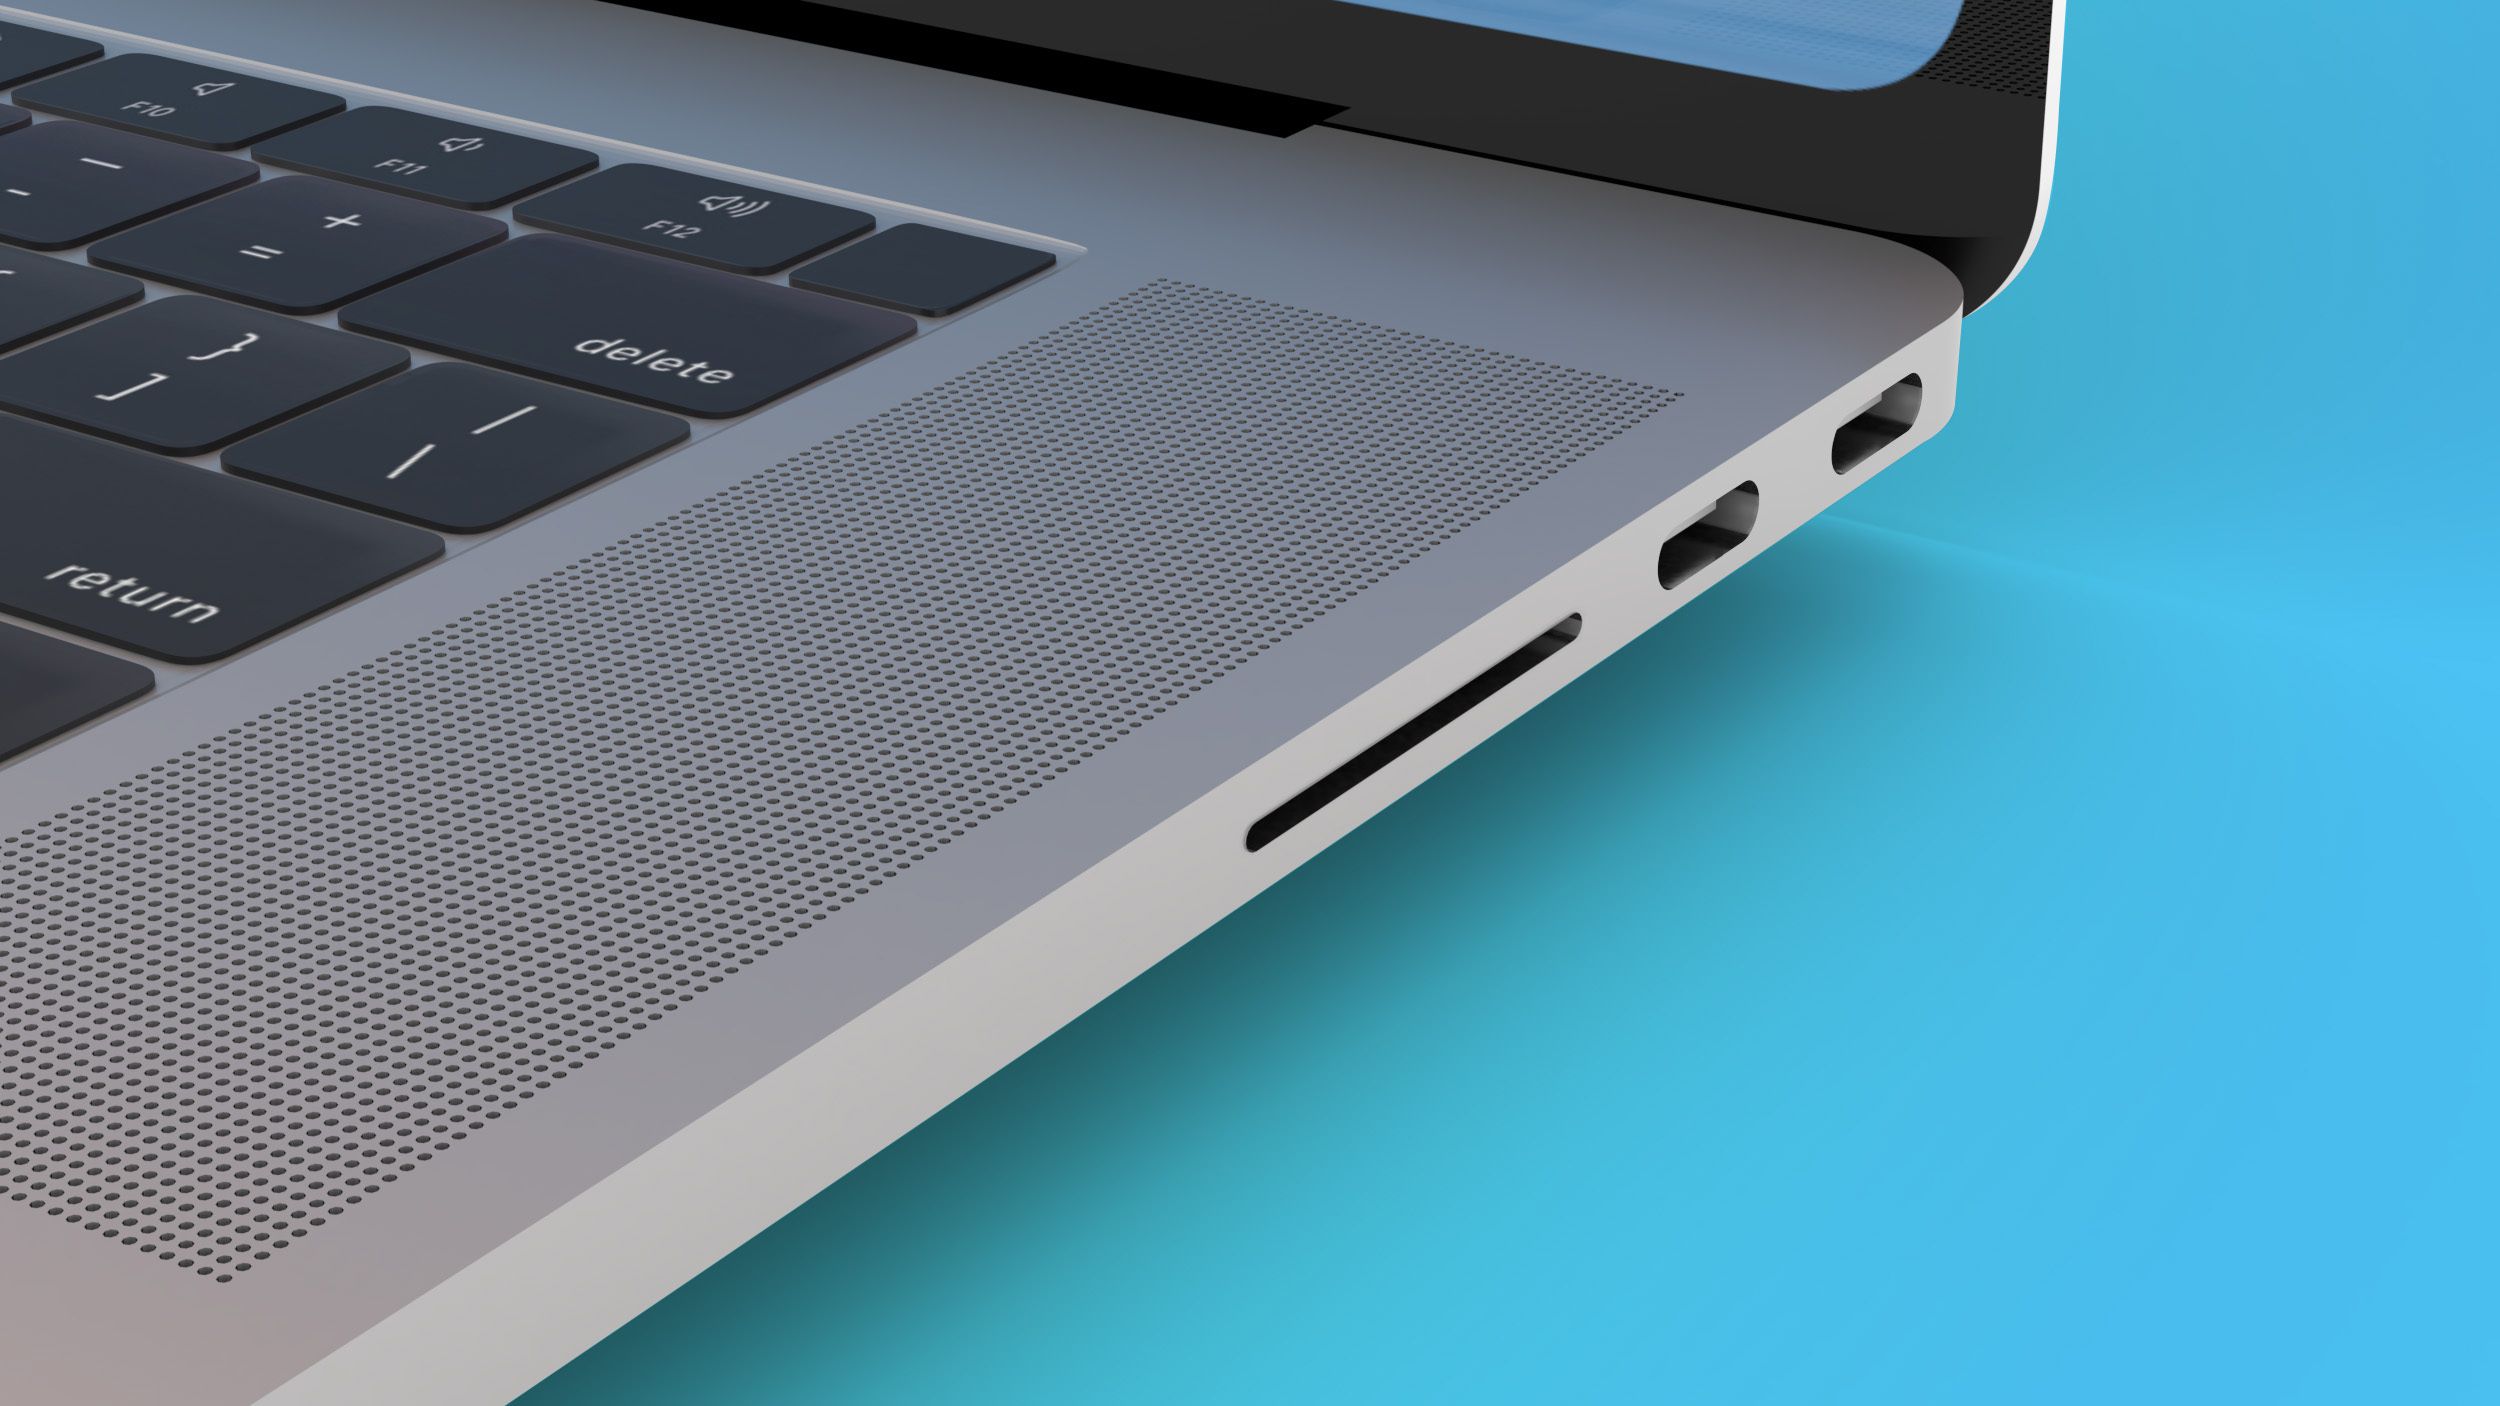 Bloomberg: The next MacBook Pro will include an SD card reader